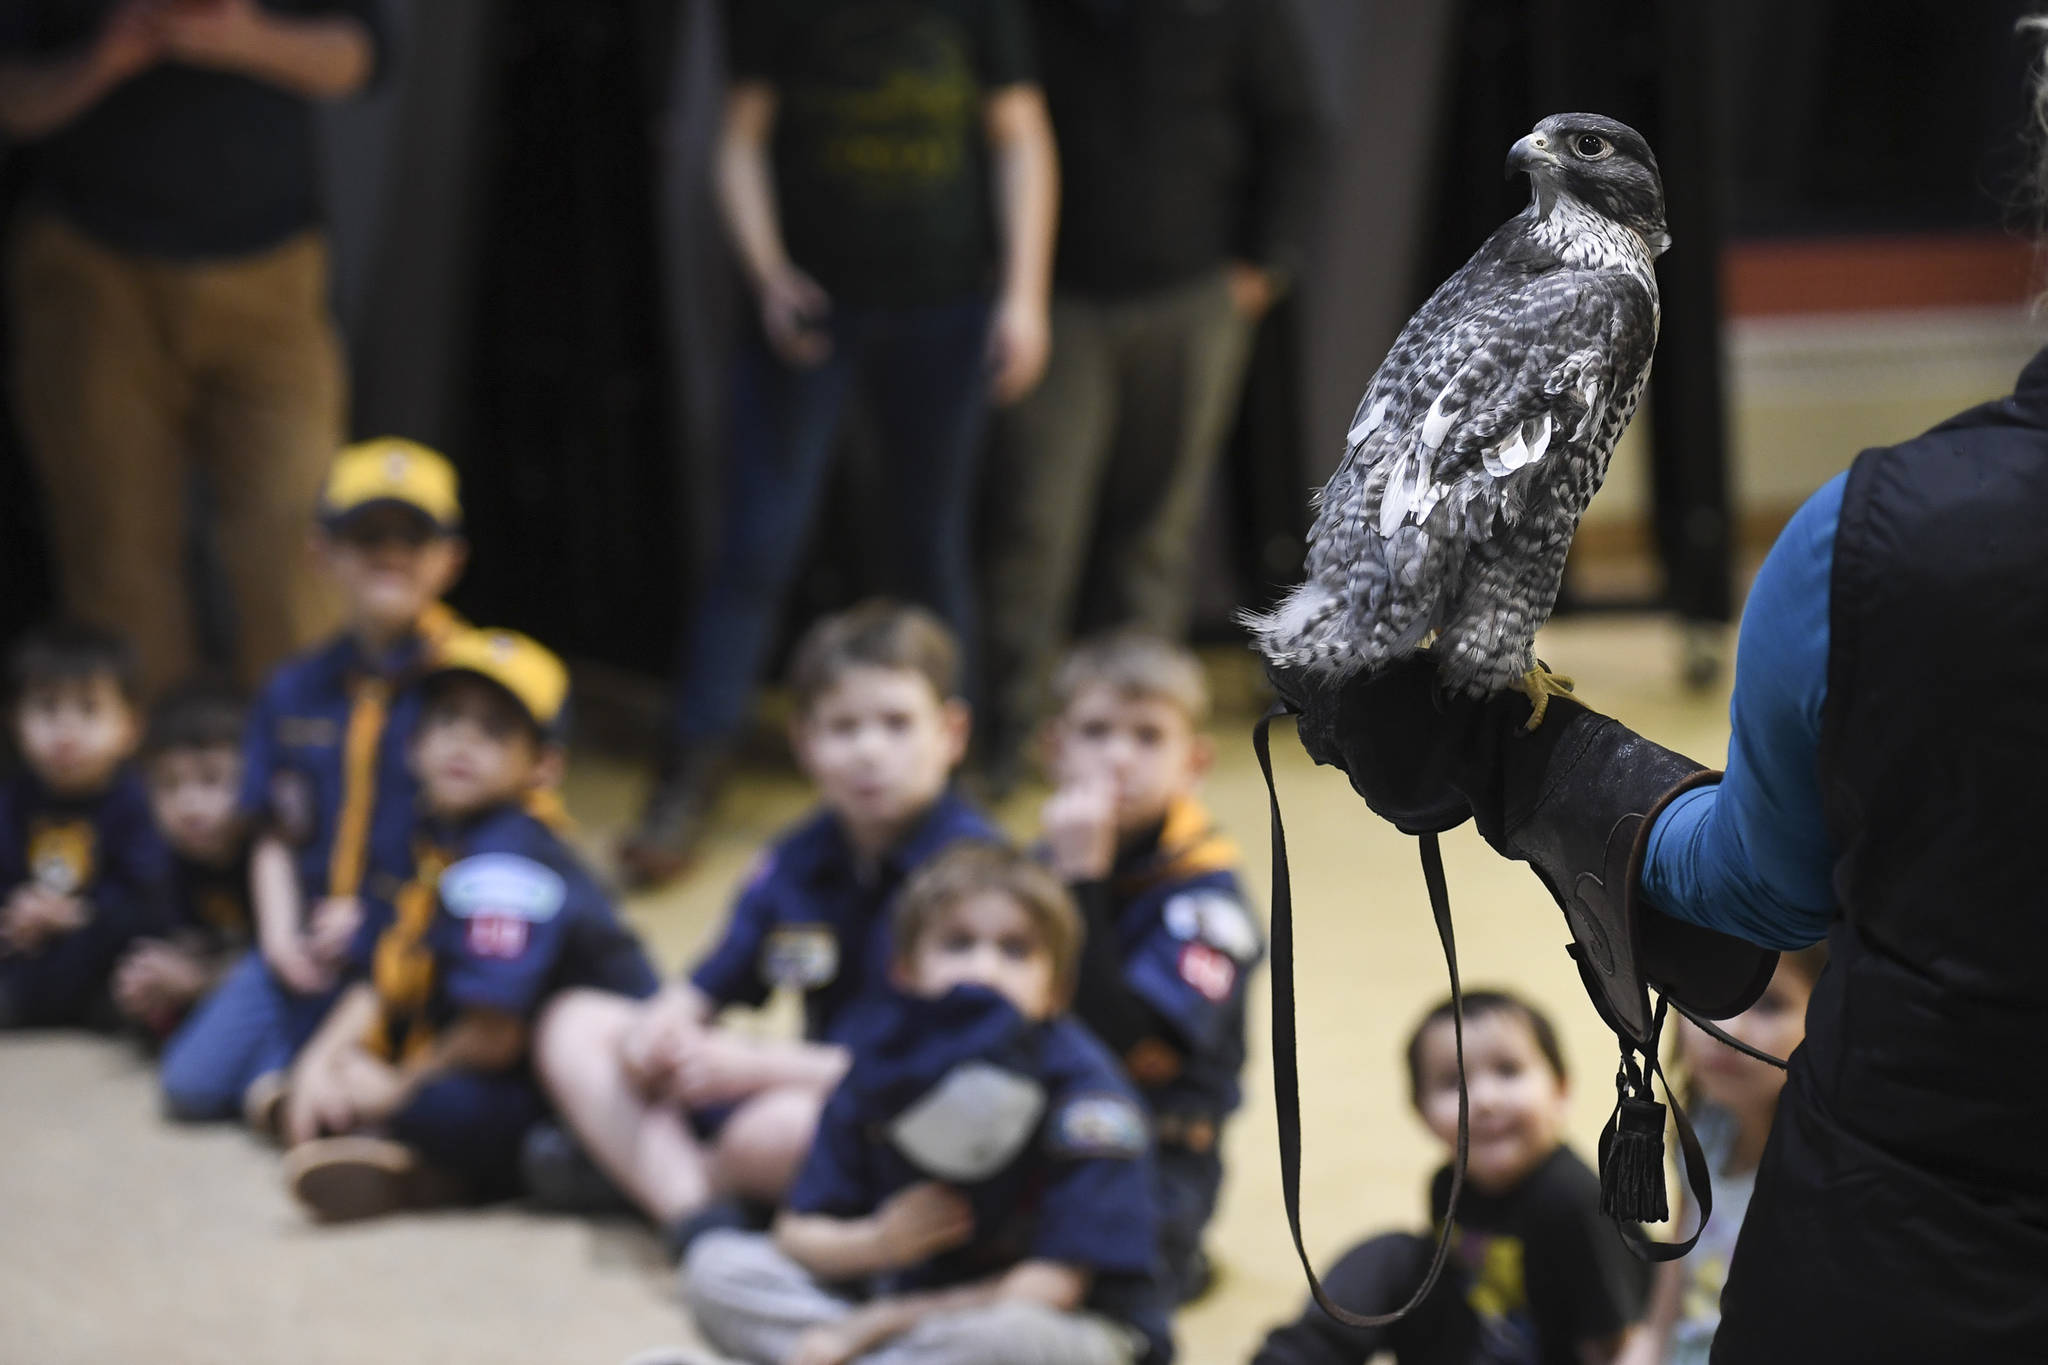 Juneau Raptor Center manager Kathy Benner displays Phil, a gyrfalcon, during a cub scout pack meeting at Harborview Elementary School on Friday, Nov. 22, 2019. (Michael Penn | Juneau Empire)